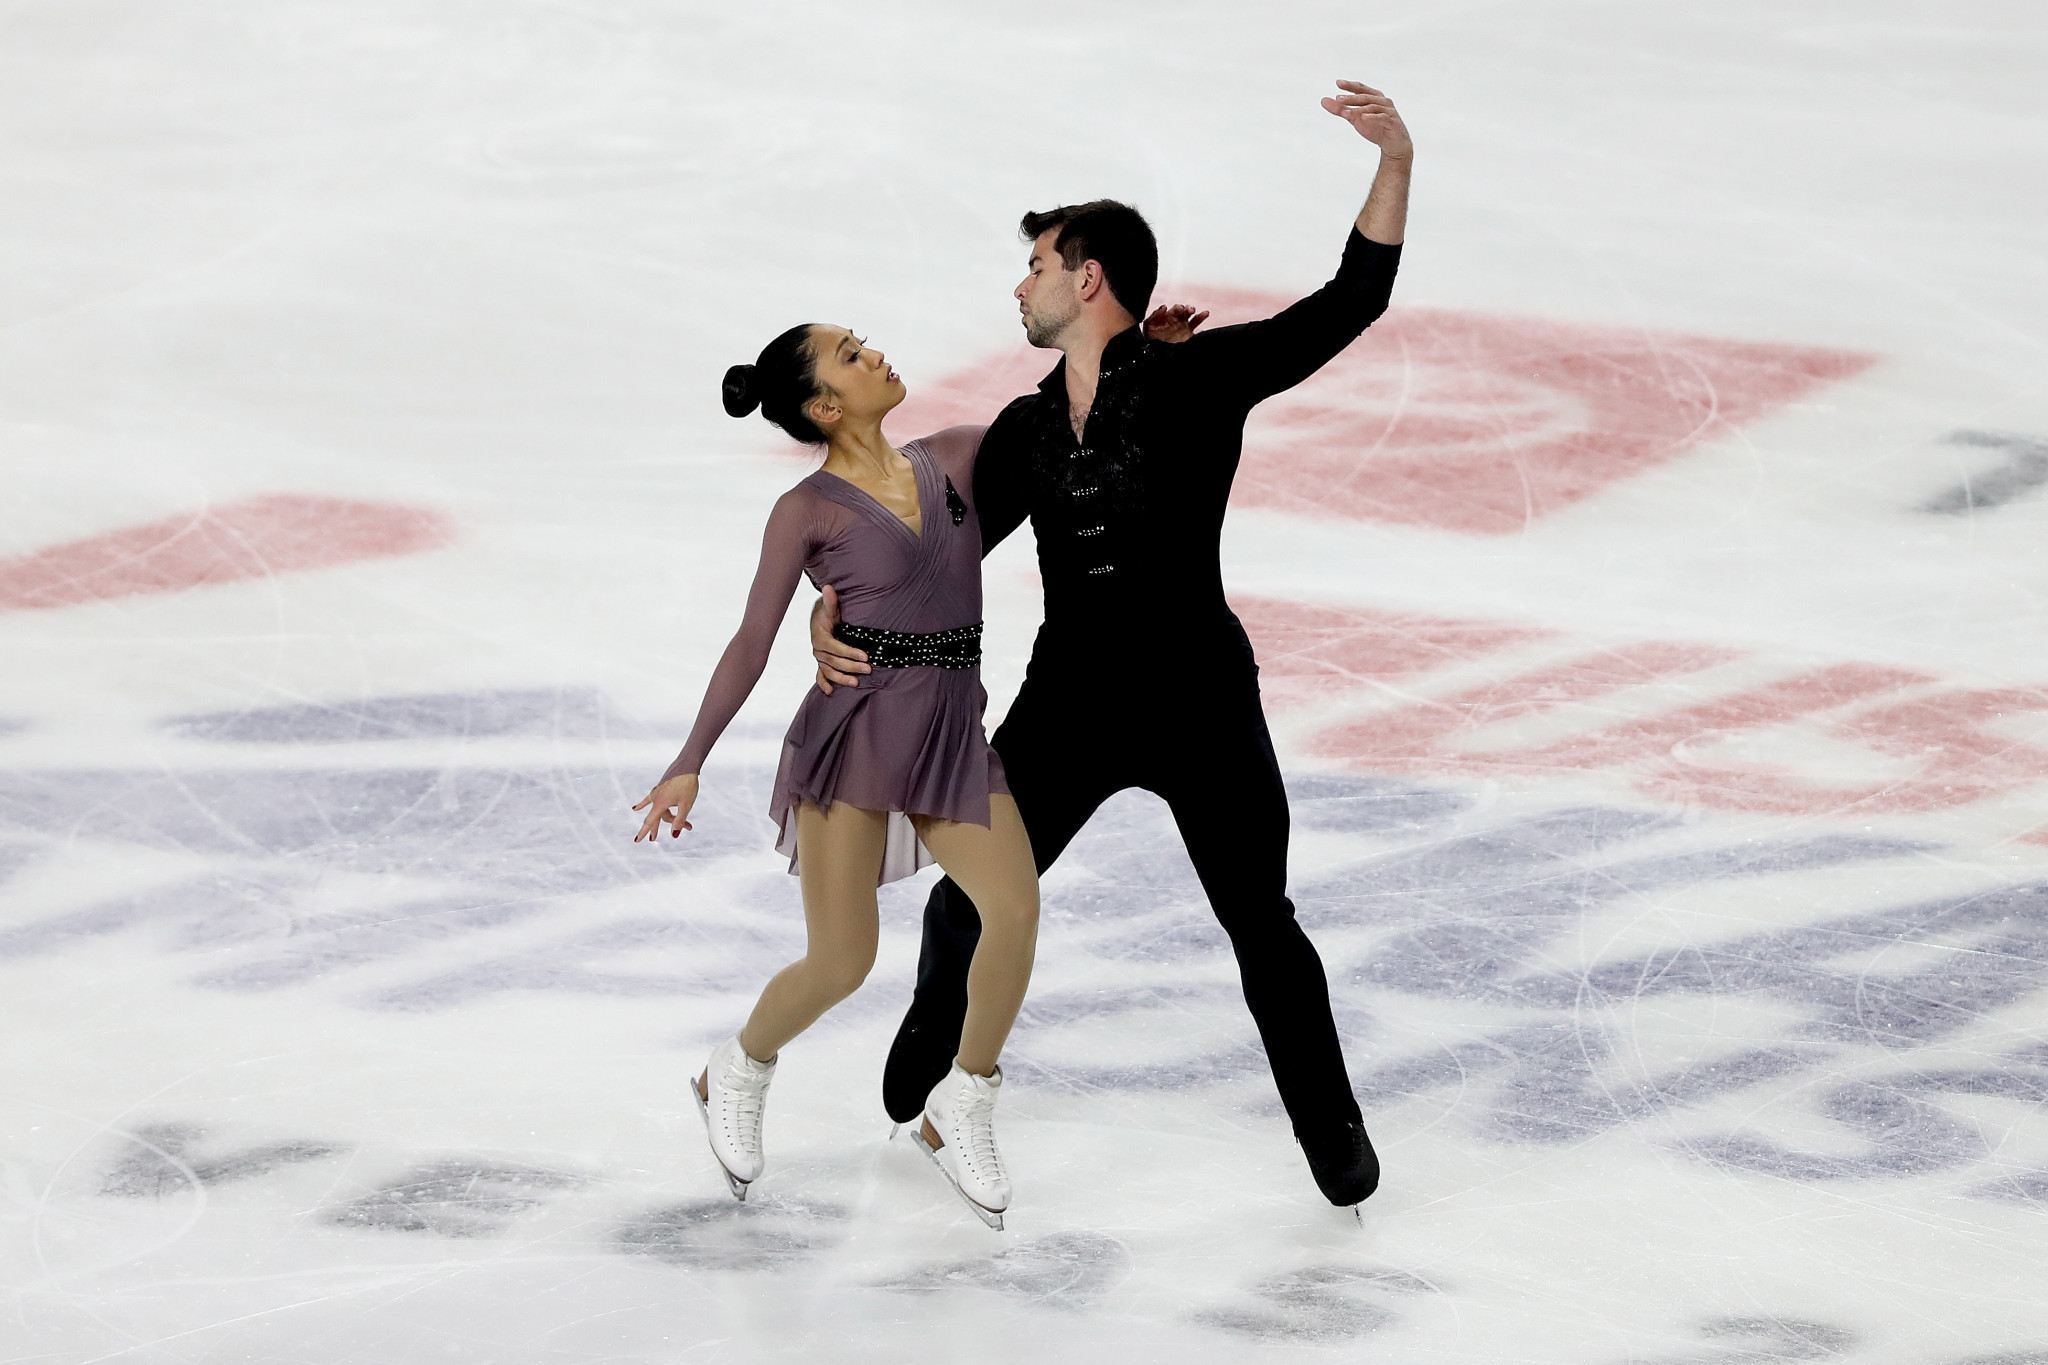 Jessica Calalang and Brian Johnson are set to compete at next week's Skate America in Las Vegas ©Getty Images